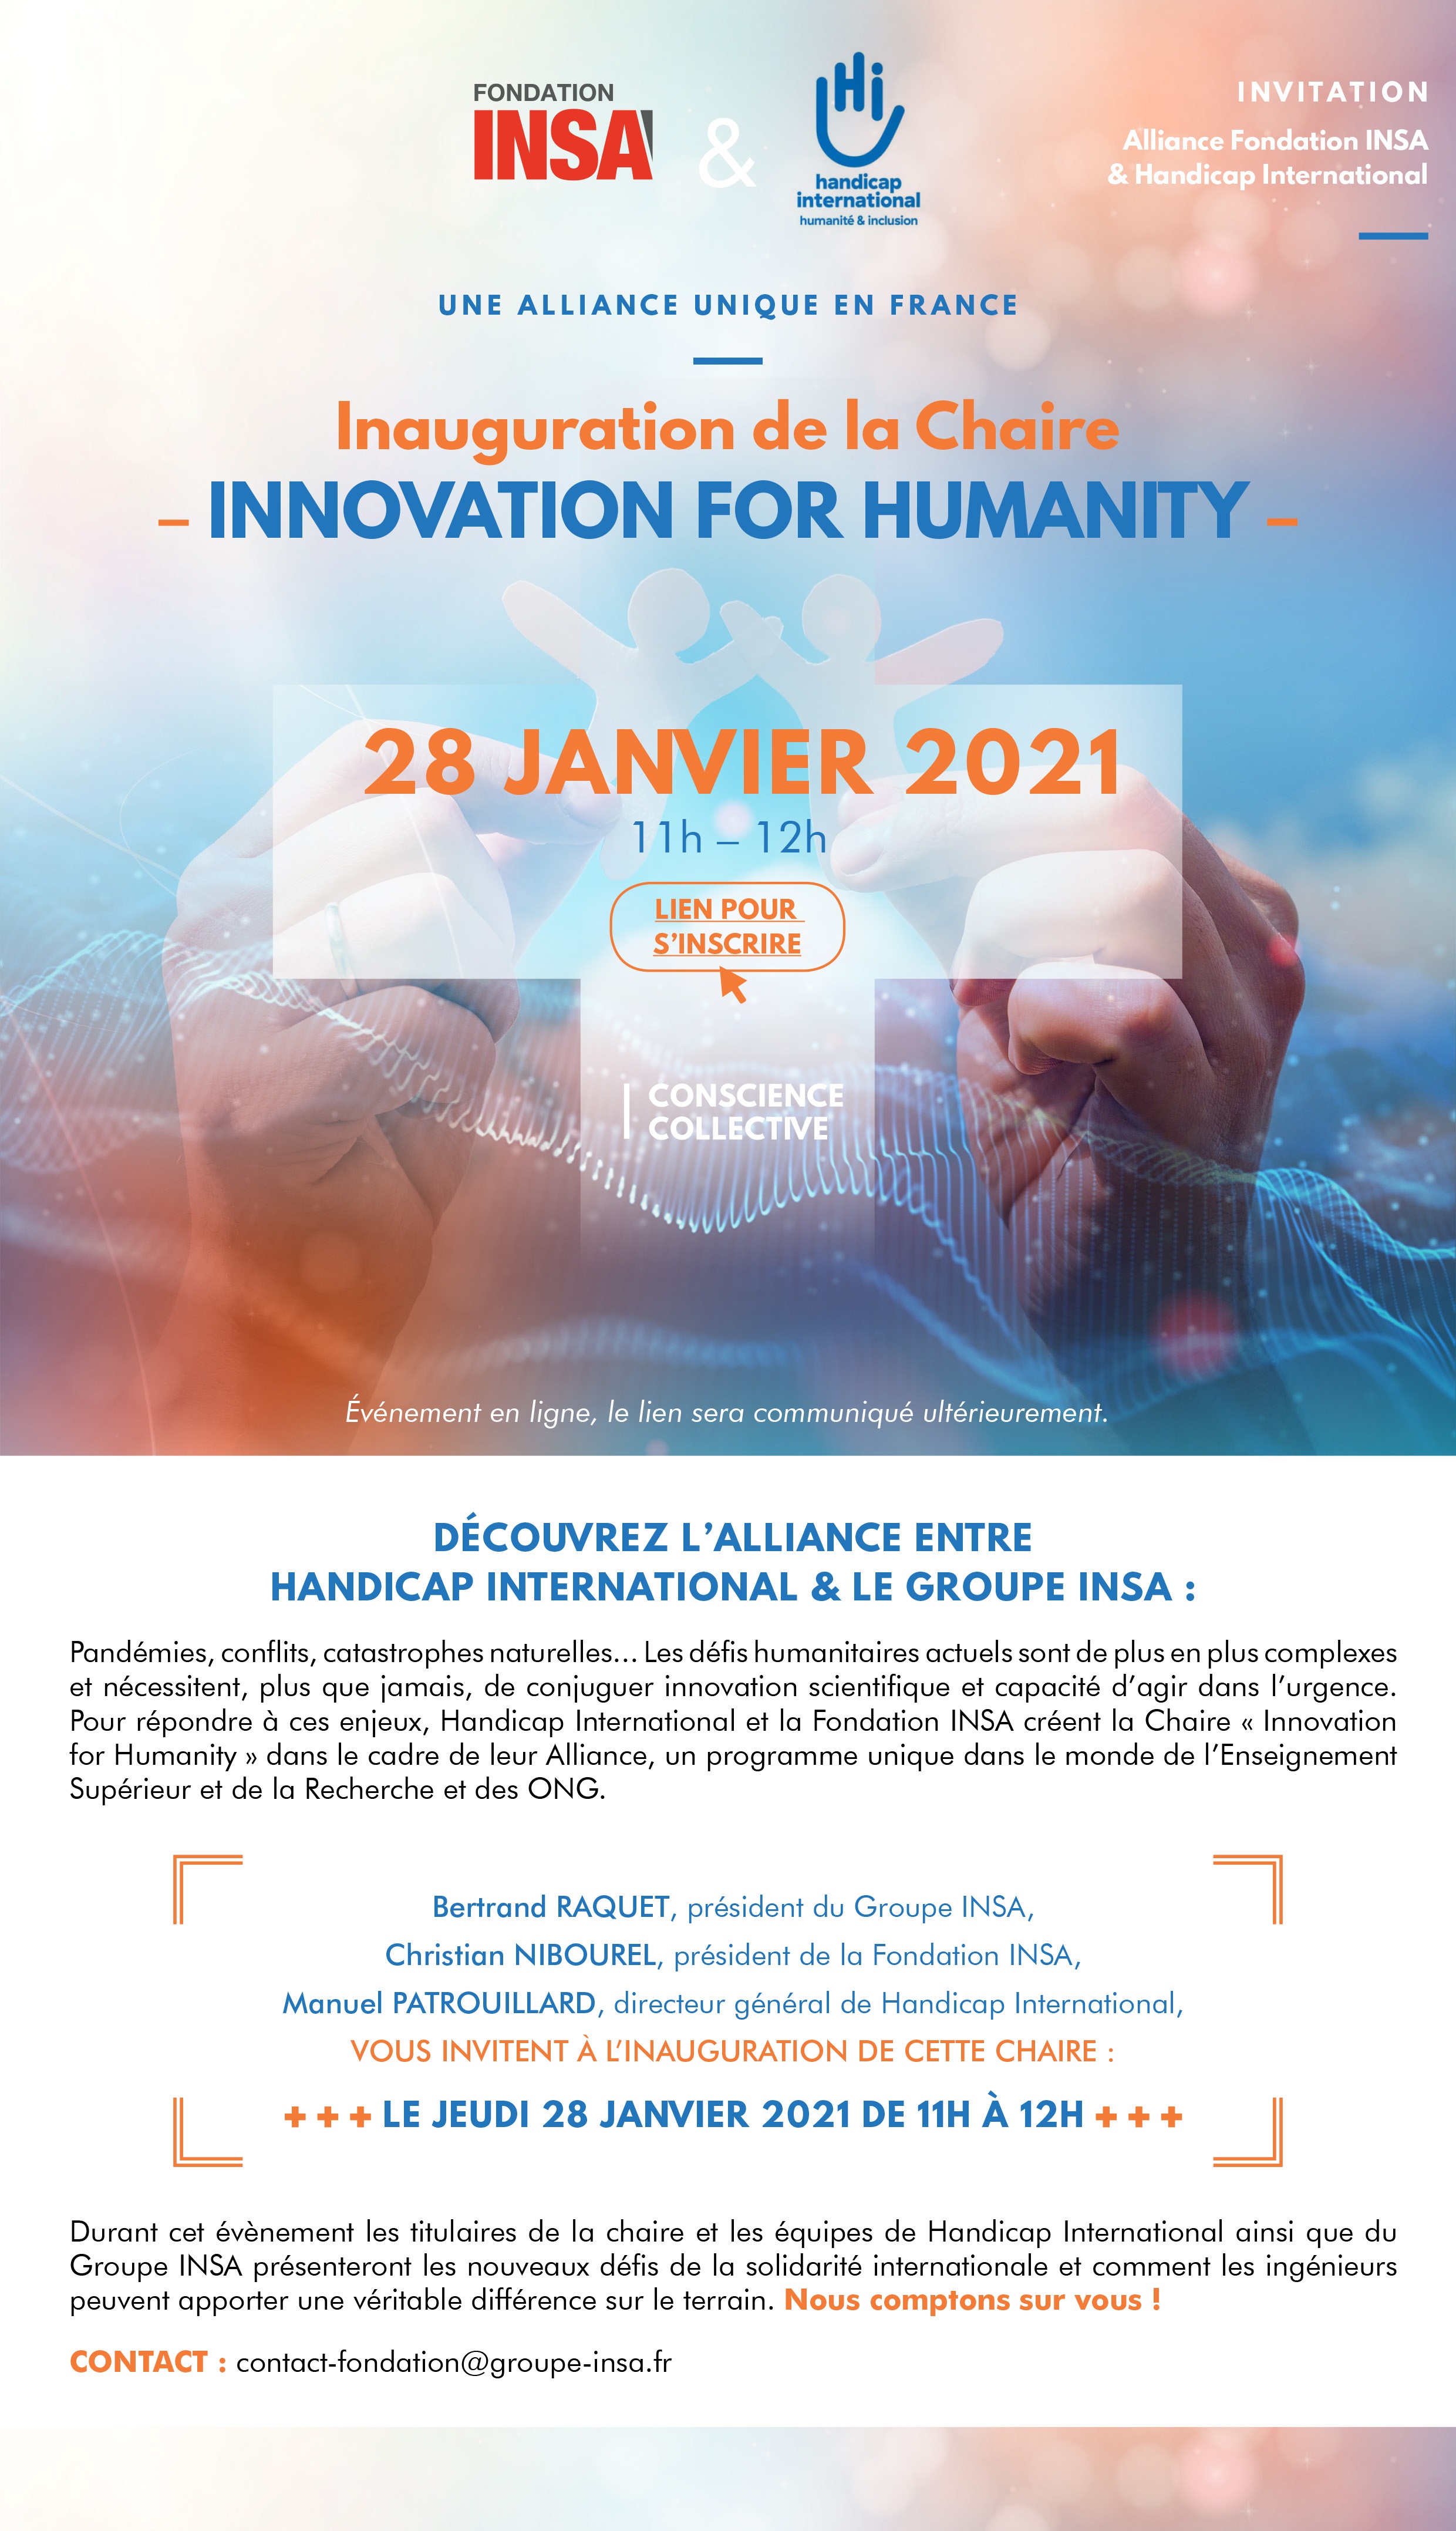 Inauguration de la Chaire "Innovation for Humanity"